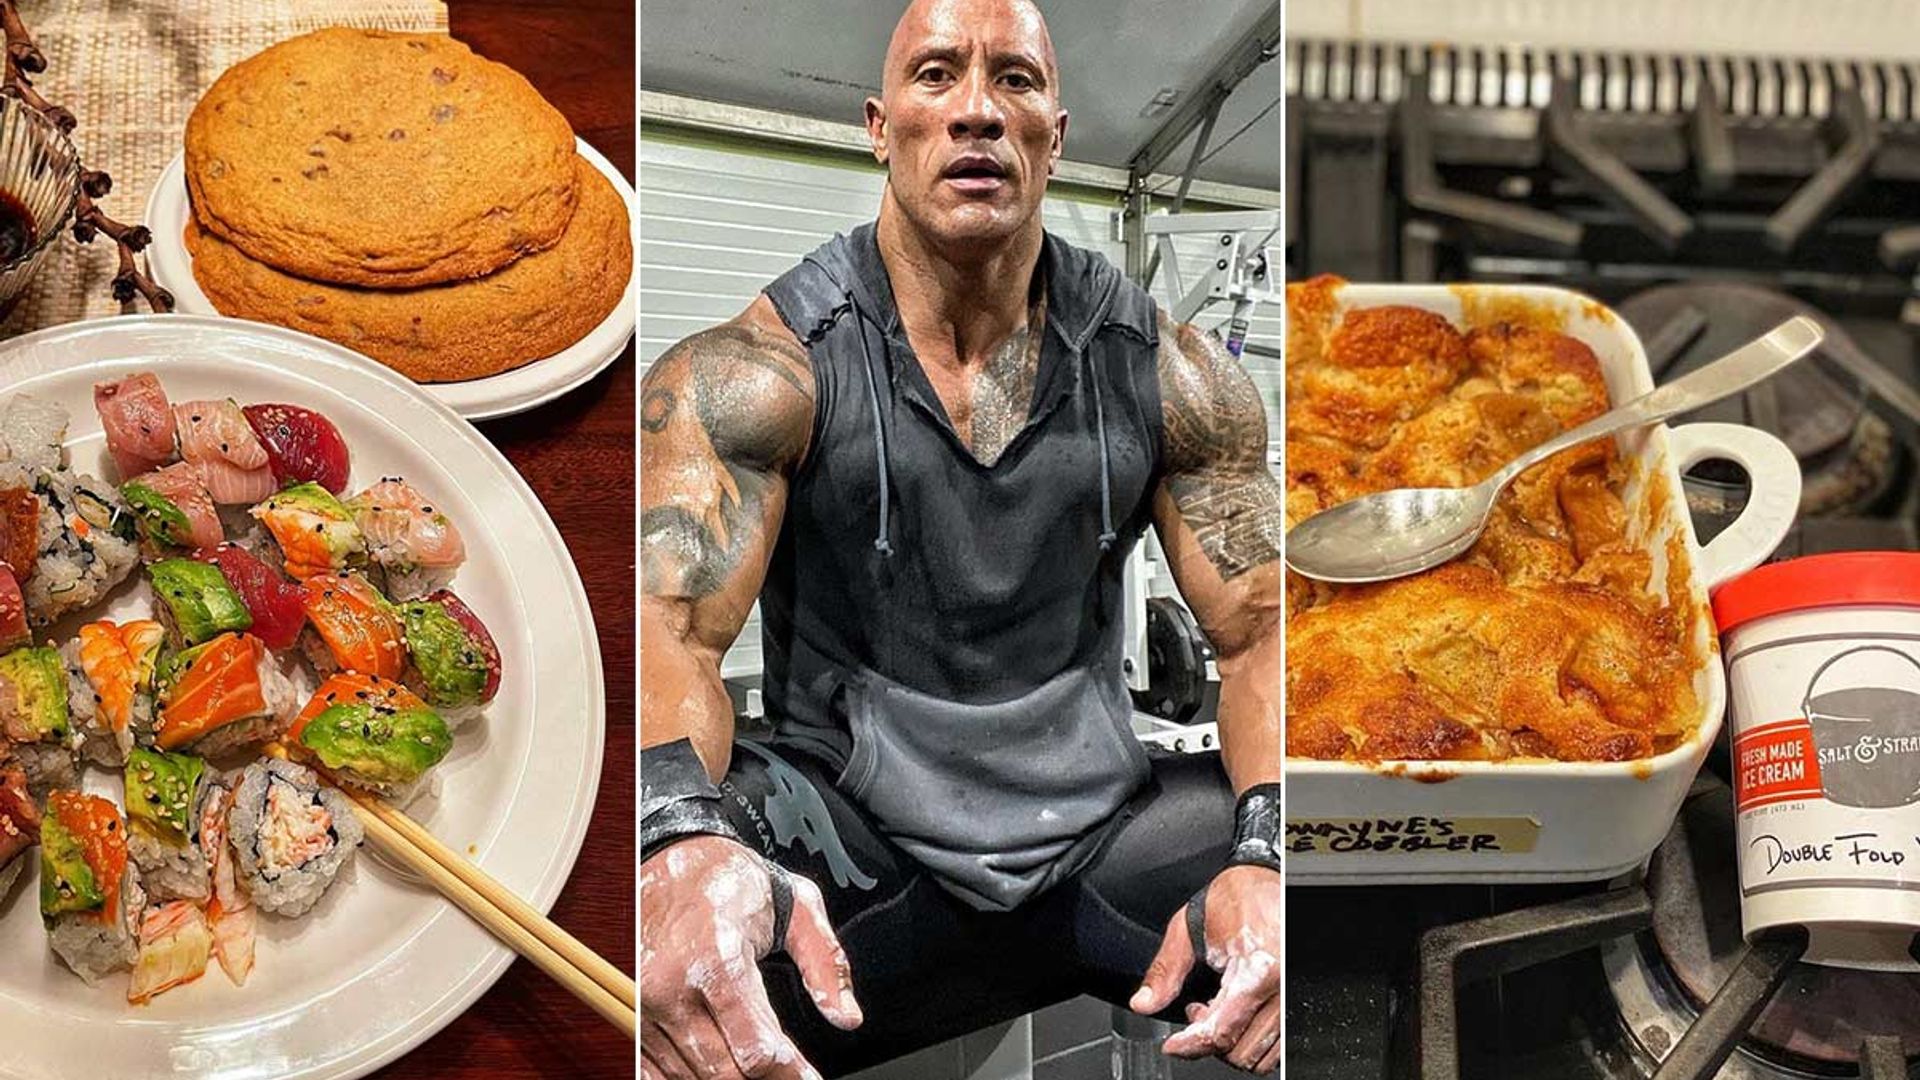 The Rock's decadent 'cheat meals' are big enough to feed a family